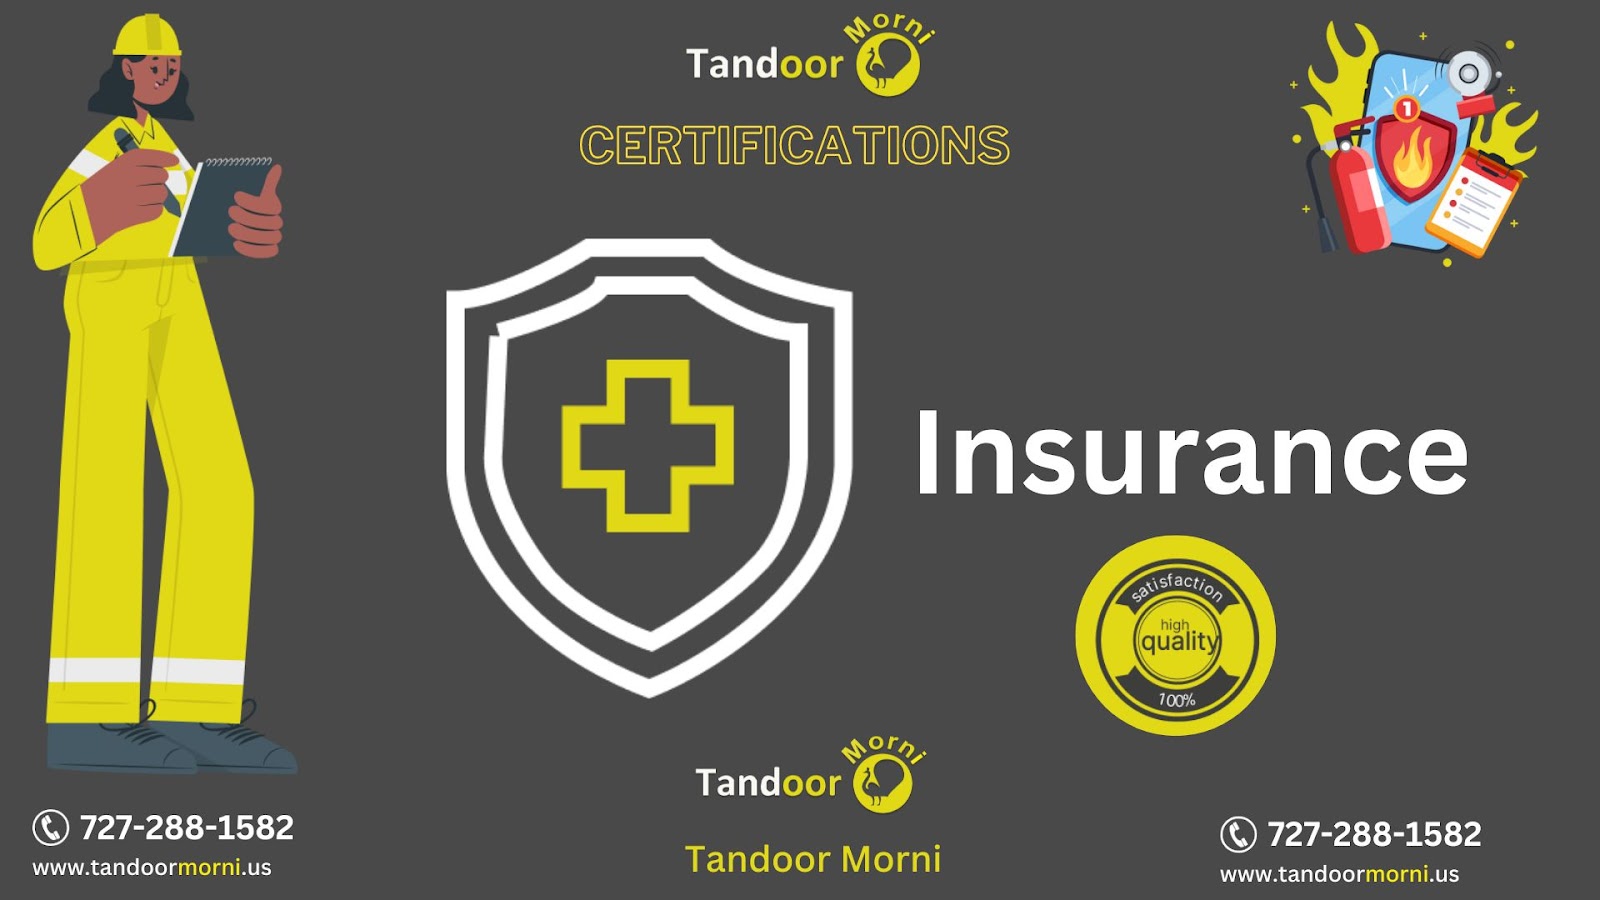 These tandoor certifications are necessary for insurance standards, and food inspectors will penalize you if safety standards in the tandoor are not met.